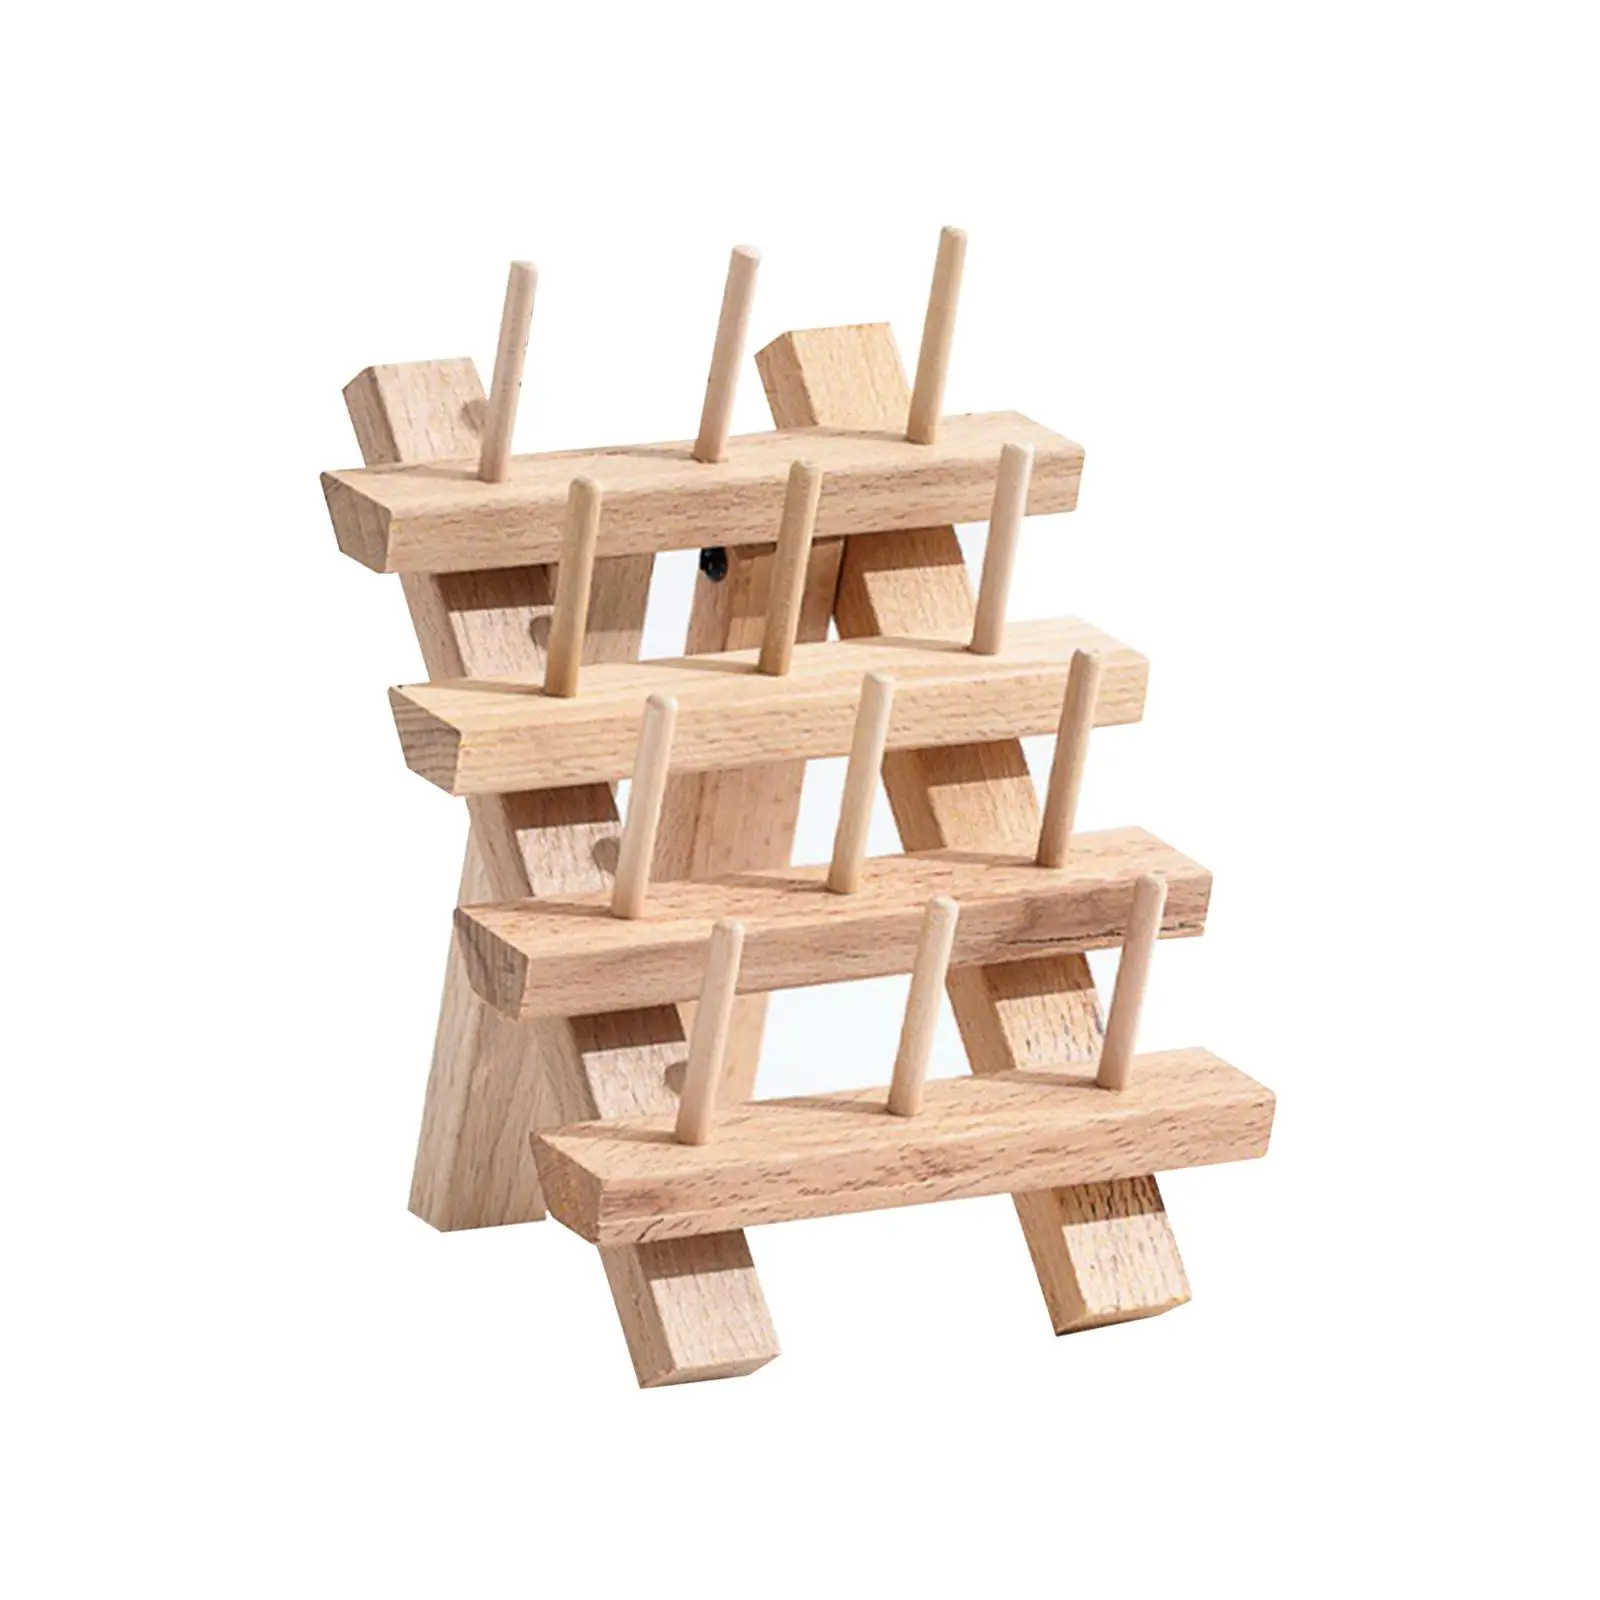 Sewing Thread Rack Holder Shelf Wooden Spool Rack for Jewelry Embroidery Hobbyists Thread Organizing Braid Knitting Tailors